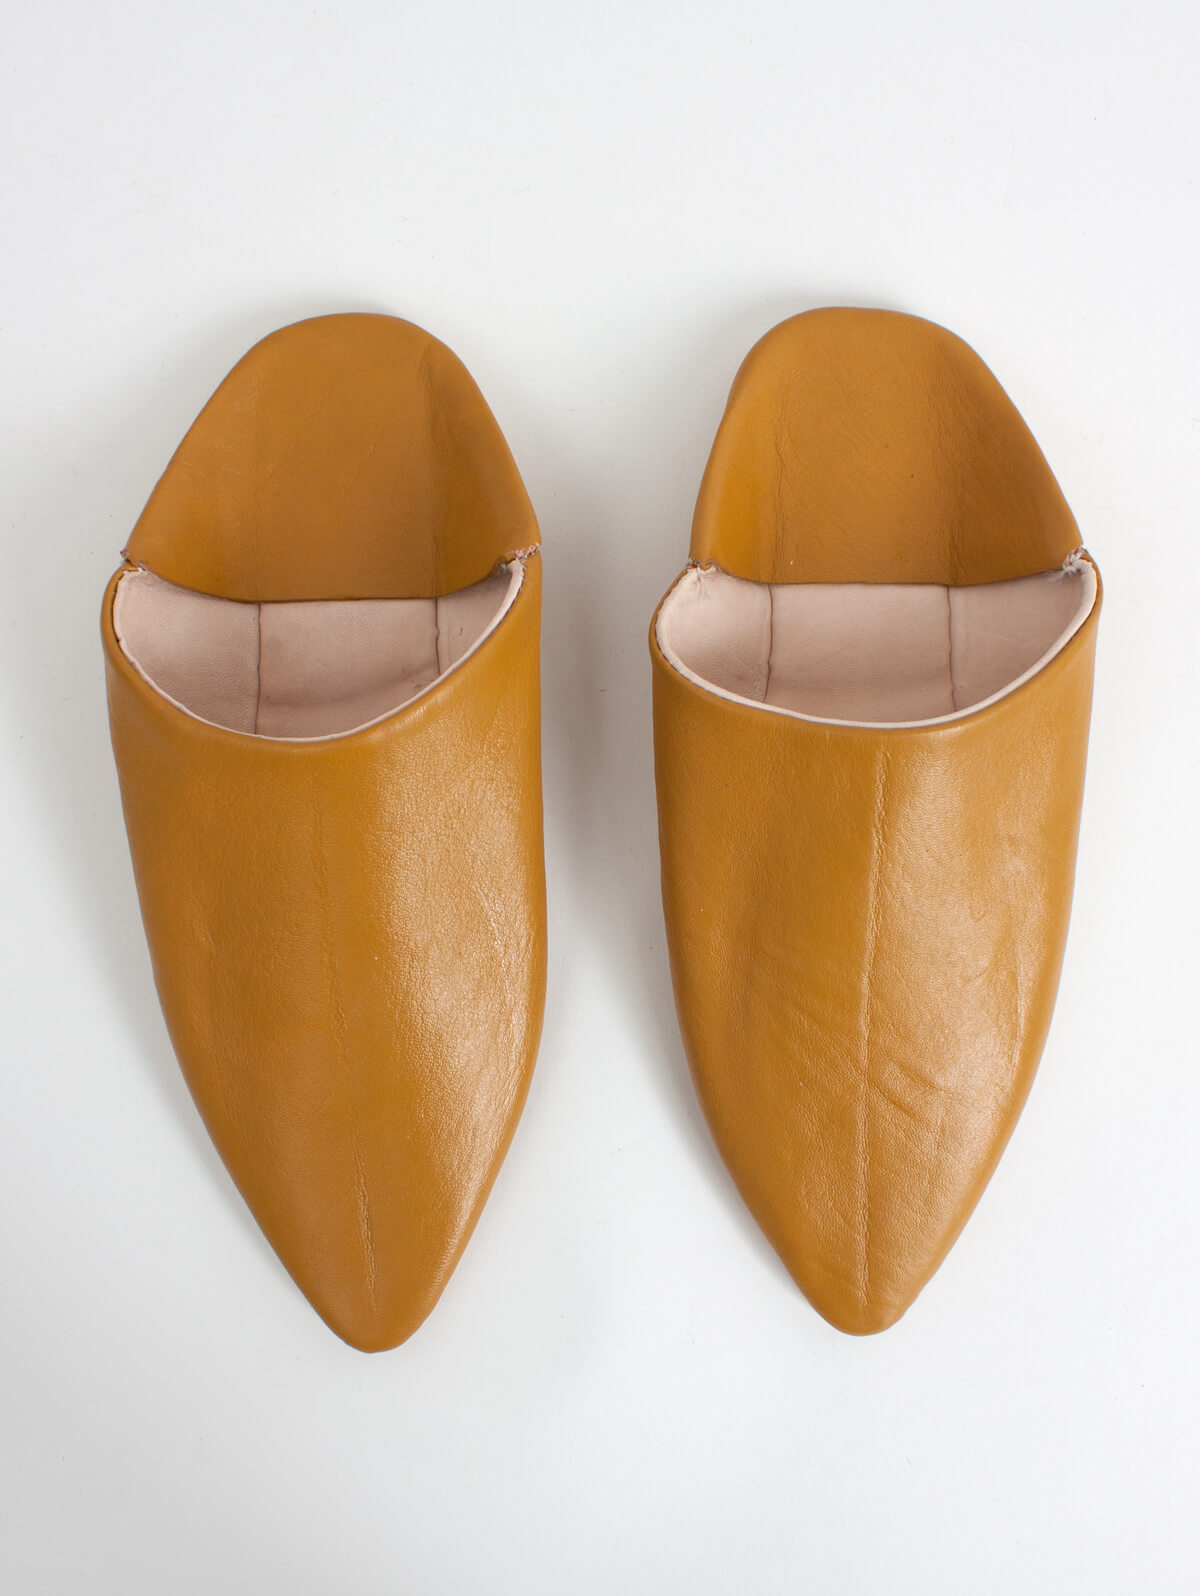 Moroccan Classic Pointed Babouche Slippers, Mustard